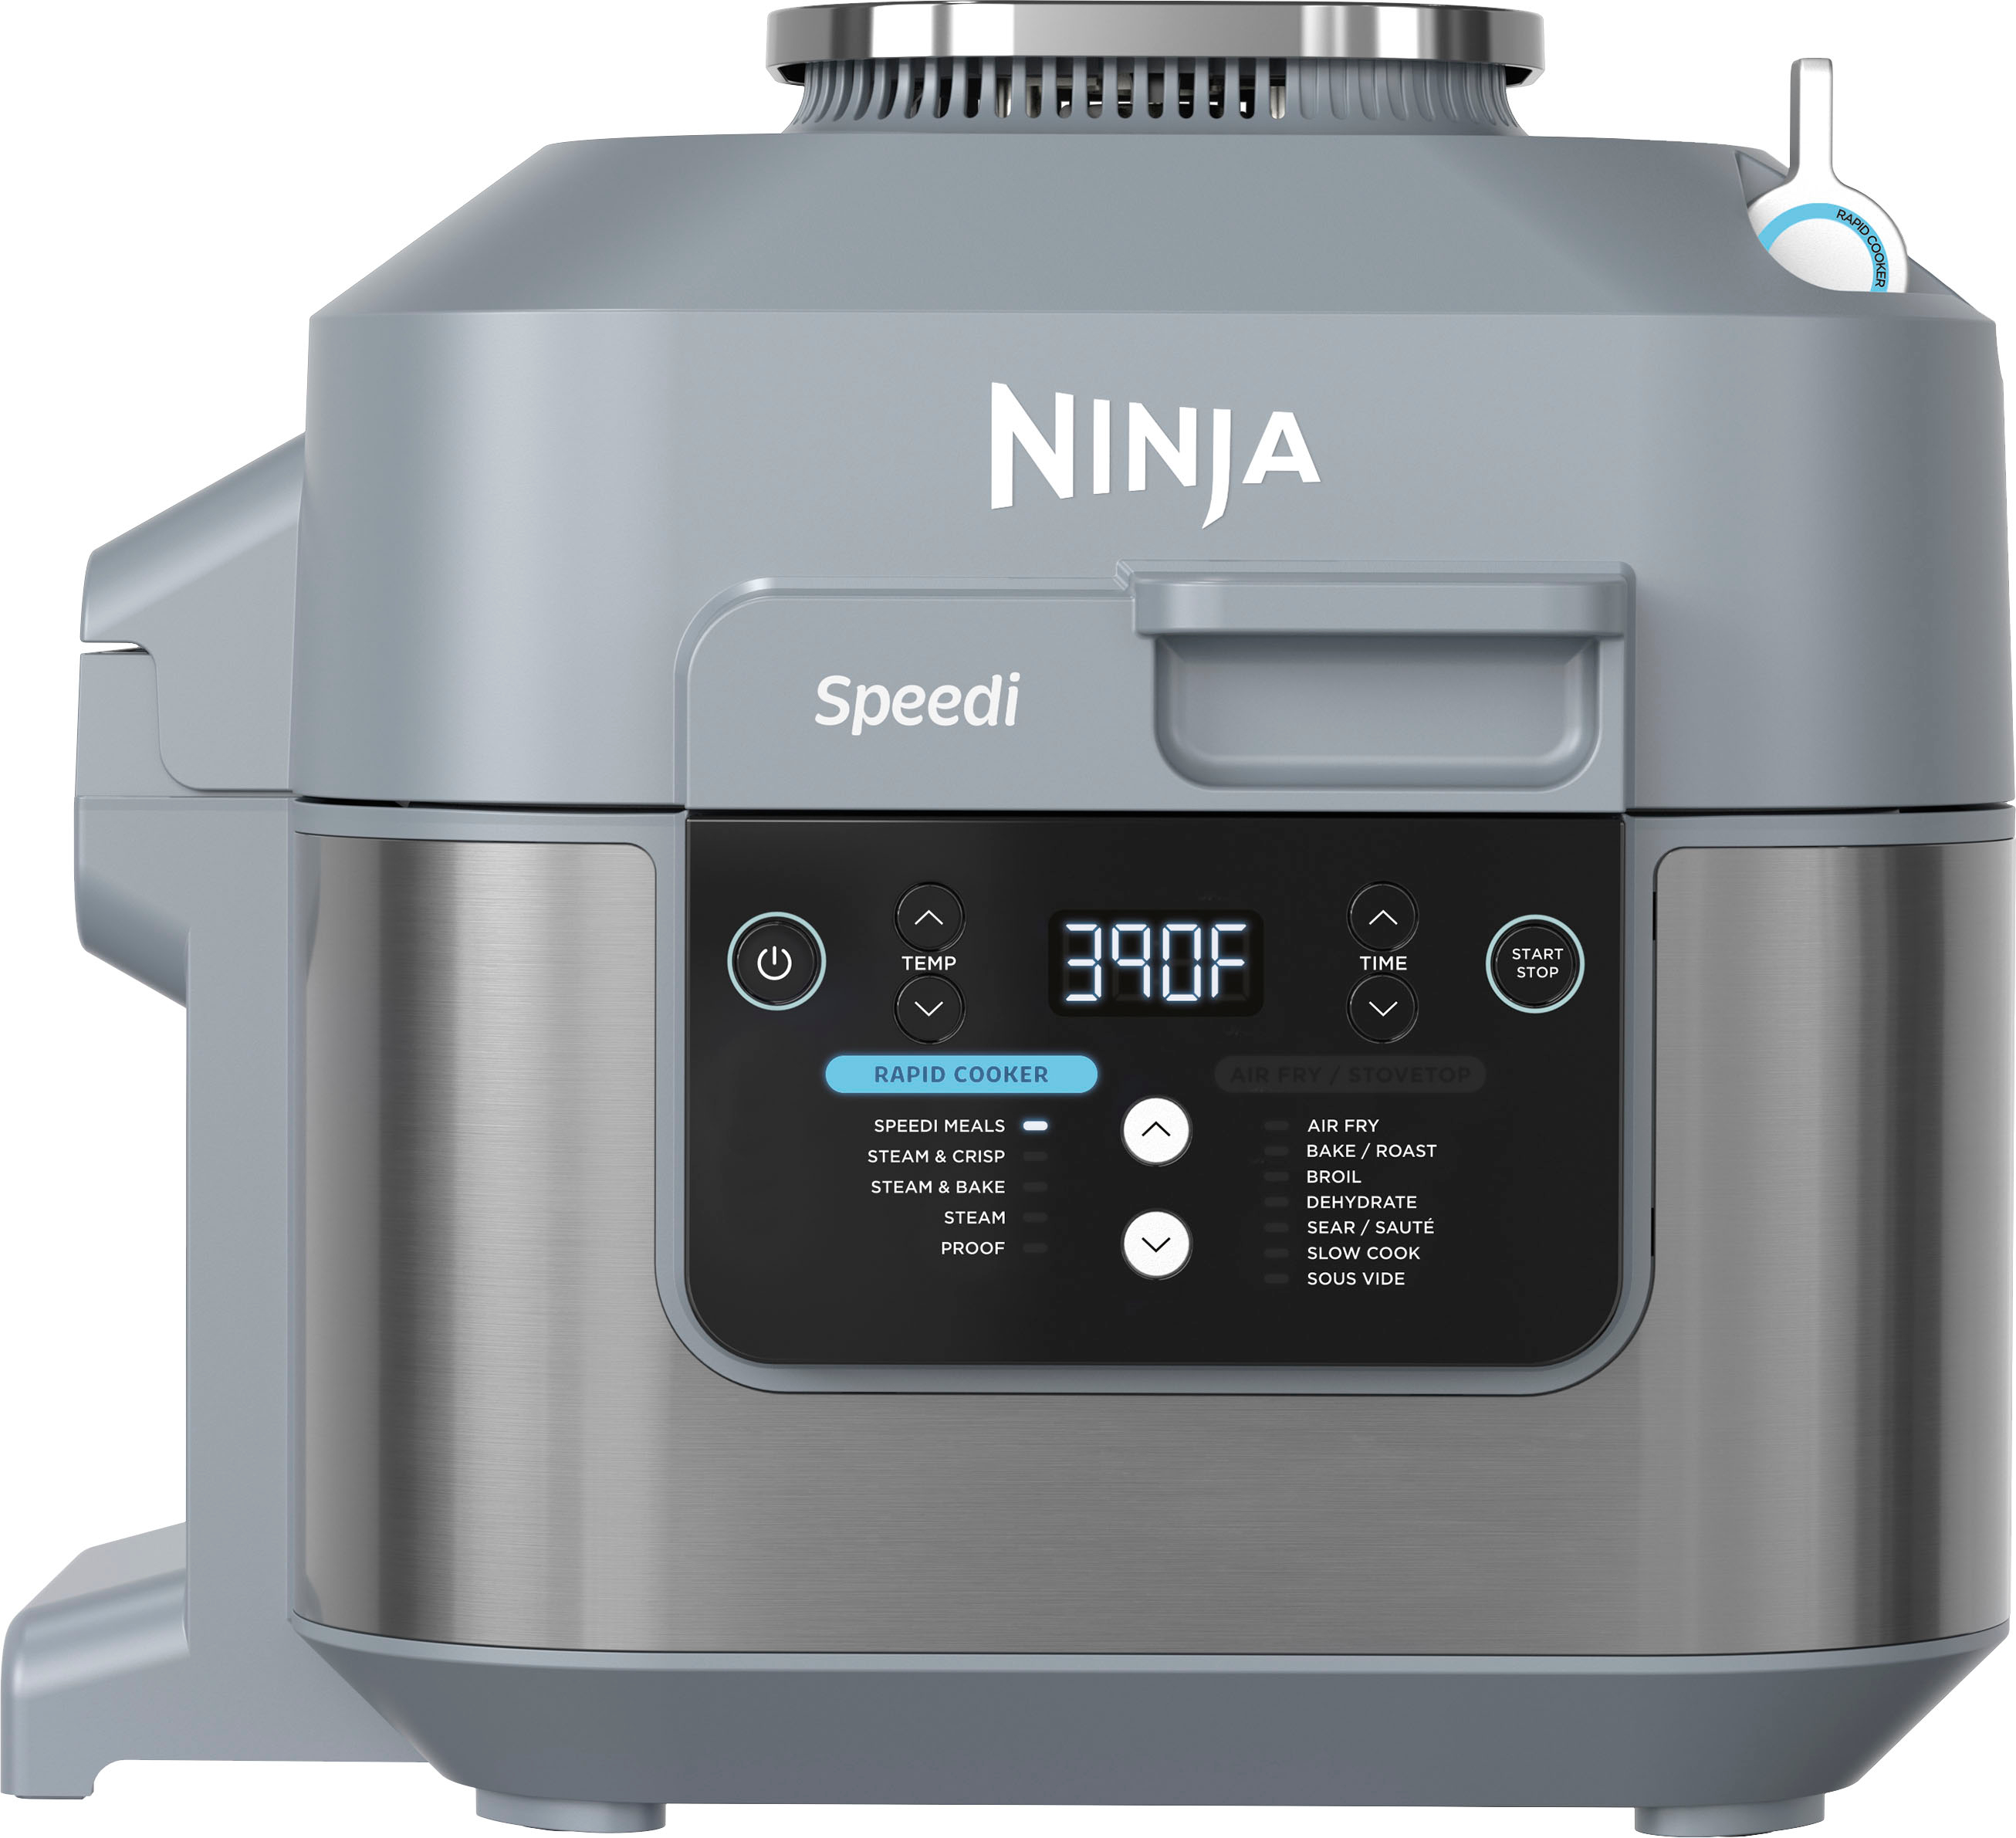 1000 Ninja Foodi Air Fryer Cookbook with Pictures: Simple & Delicious Air Fry, Air Roast, Reheat, Dehydrate Food for Your Family & Friends (for Beginners and Advanced Users) [Book]